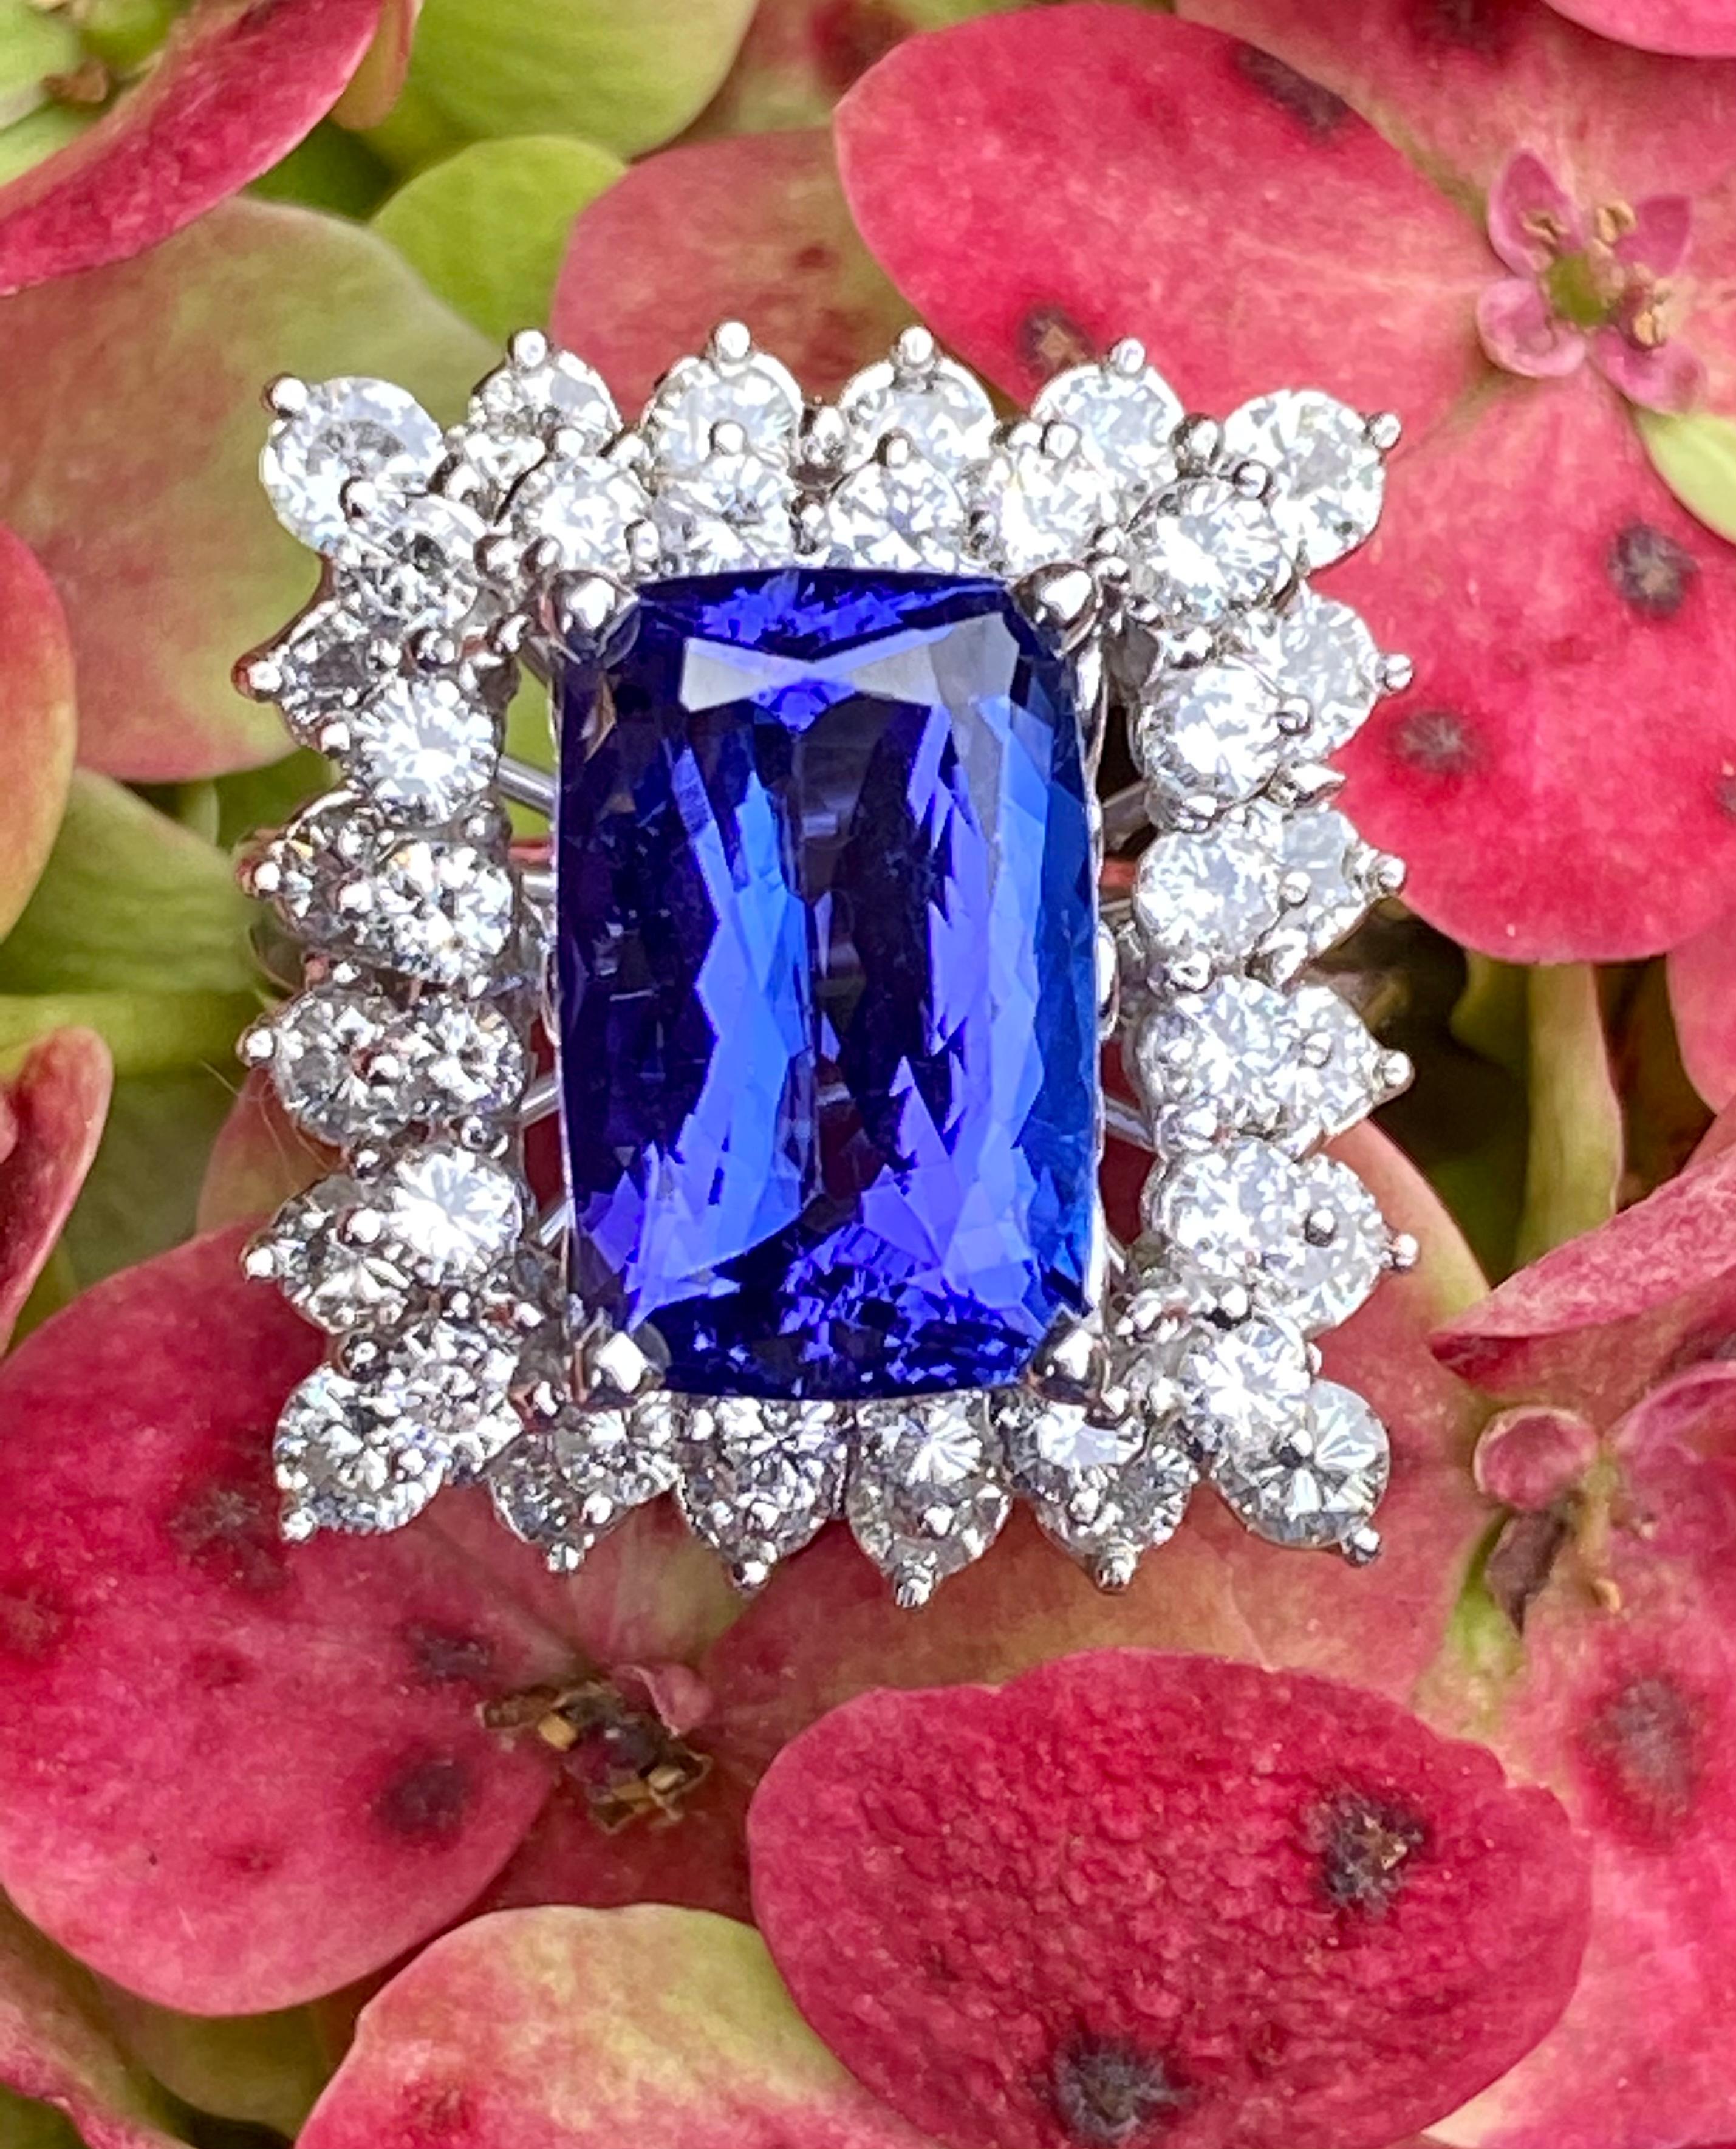 Very elegant and showy, 14 karat white gold cocktail ring features a large, rectangular radiant cut, prong set vivid tanzanite, surrounded by a pair of stepped down round brilliant, prong set diamond halos.  The tanzanite is the most beautiful deep